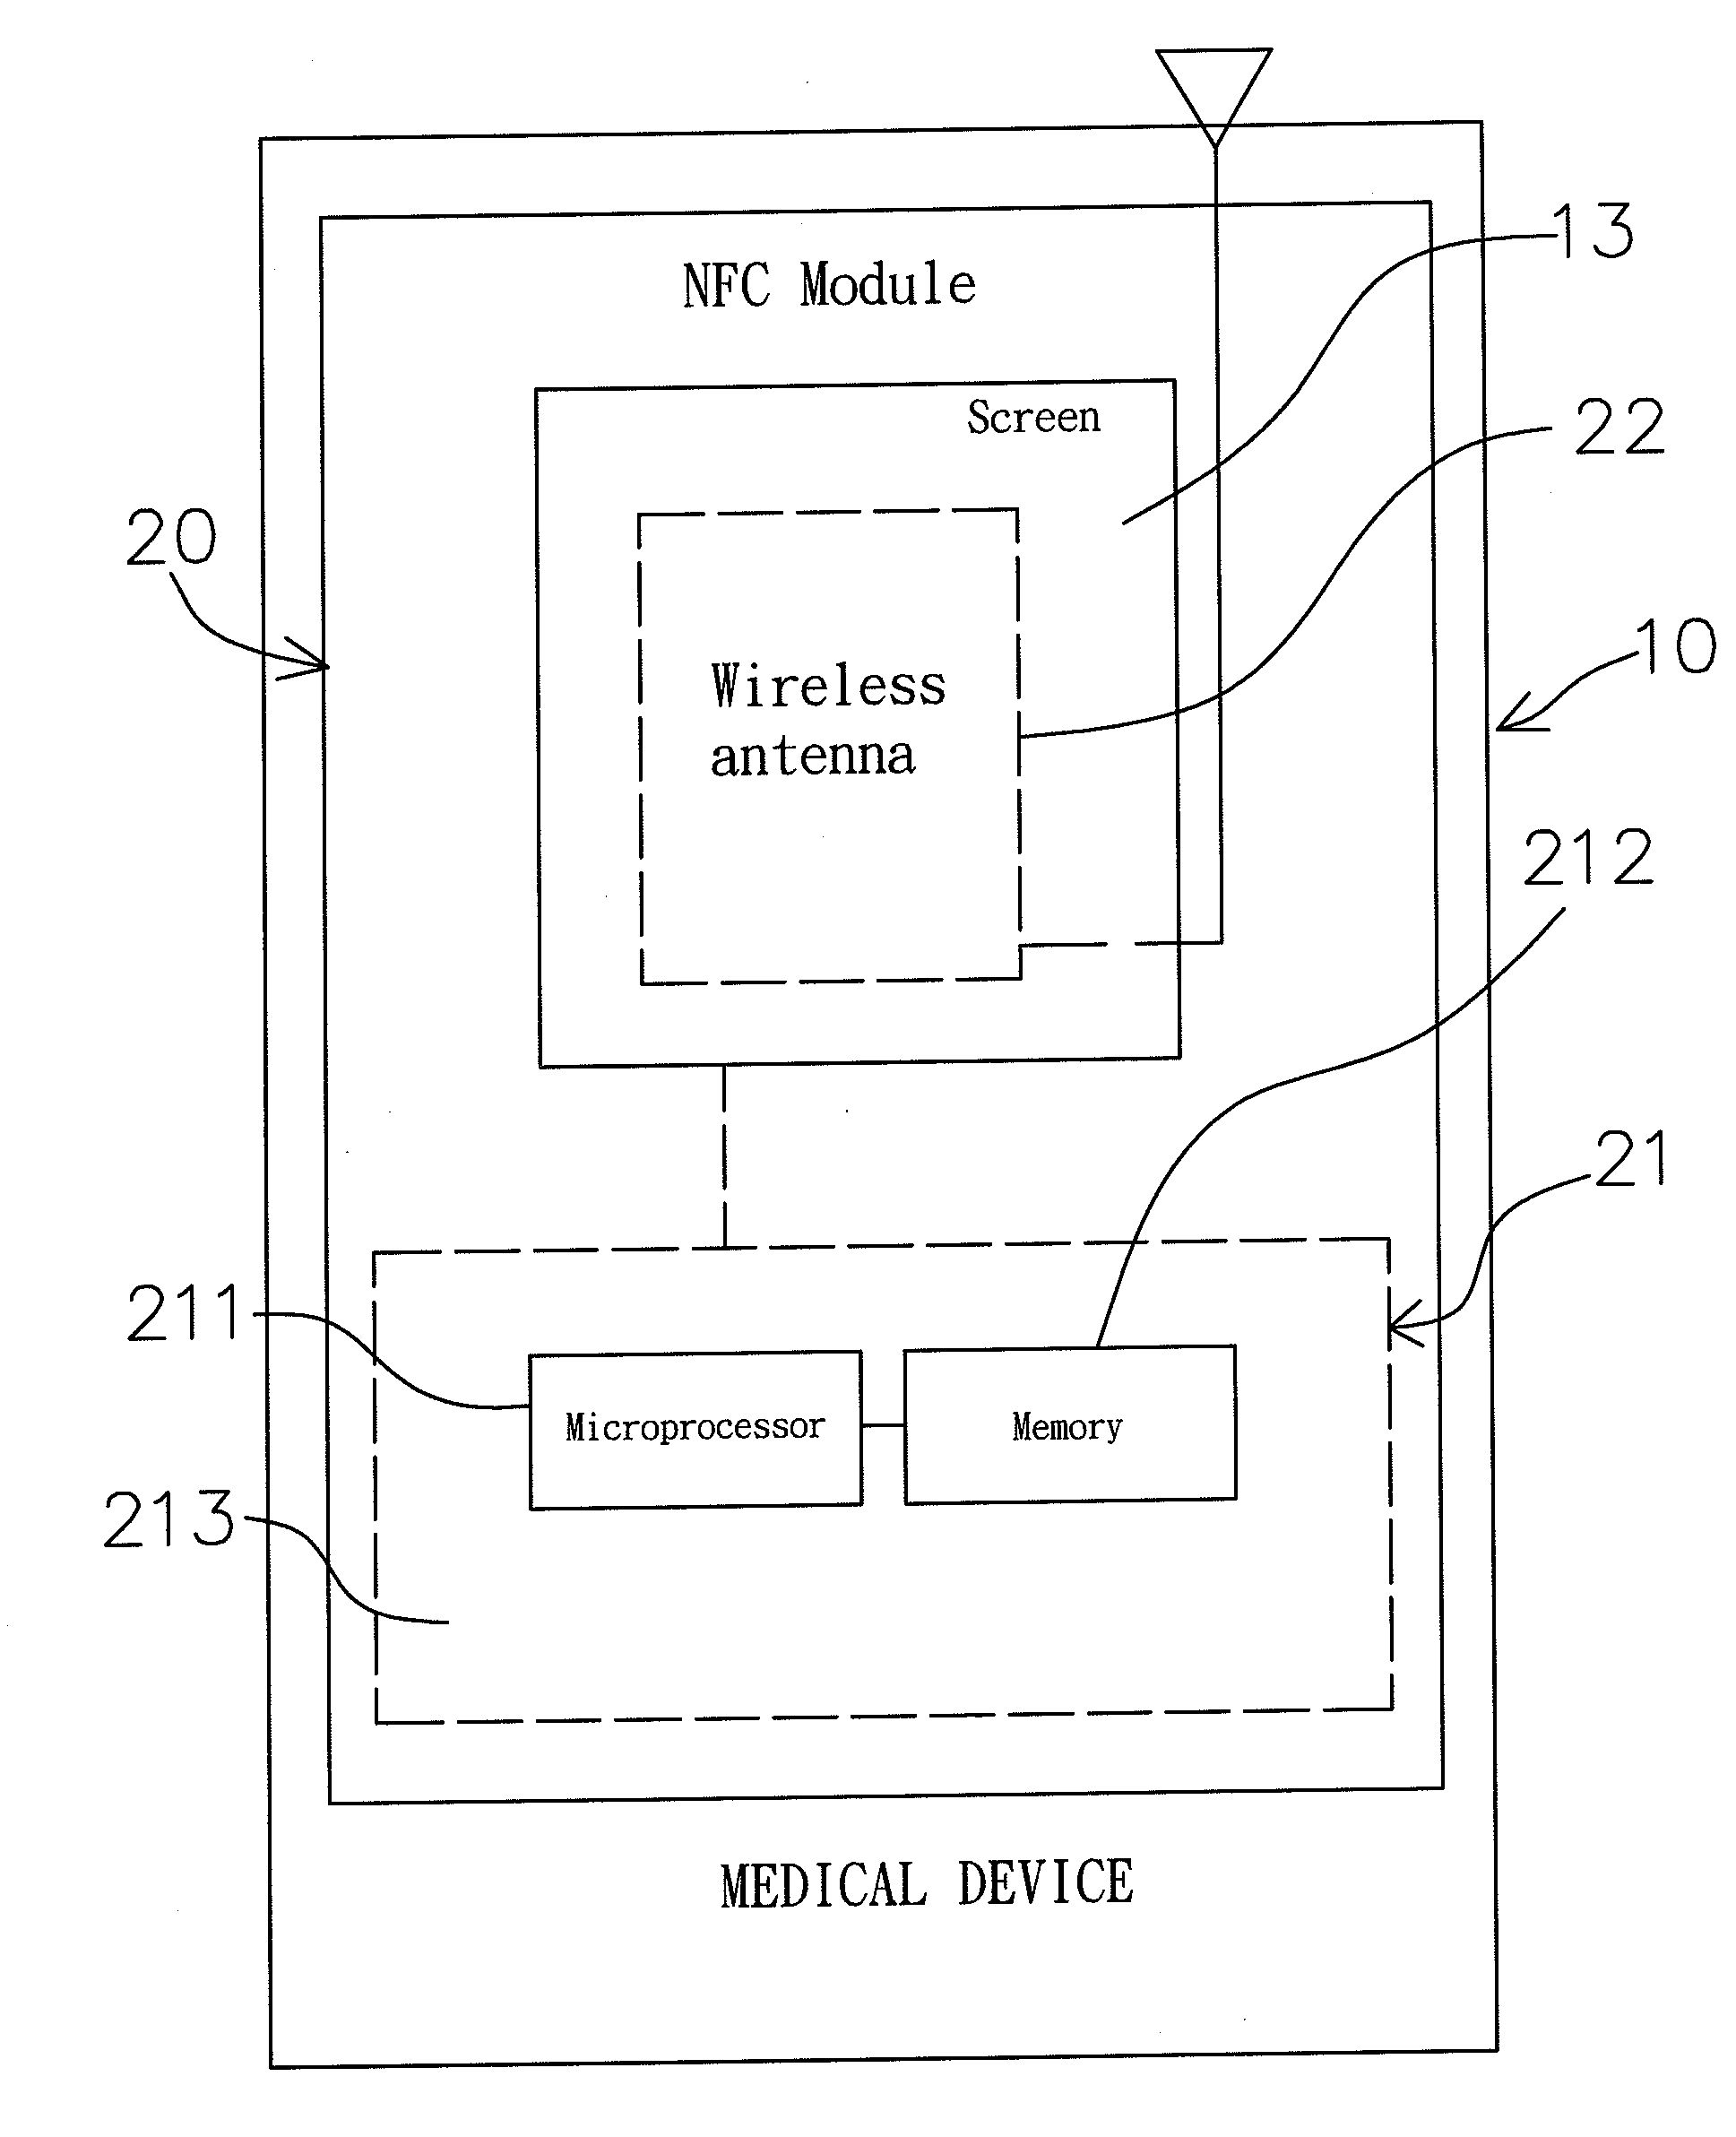 Antenna configuration structure of an NFC (near field communication) enabled medical device